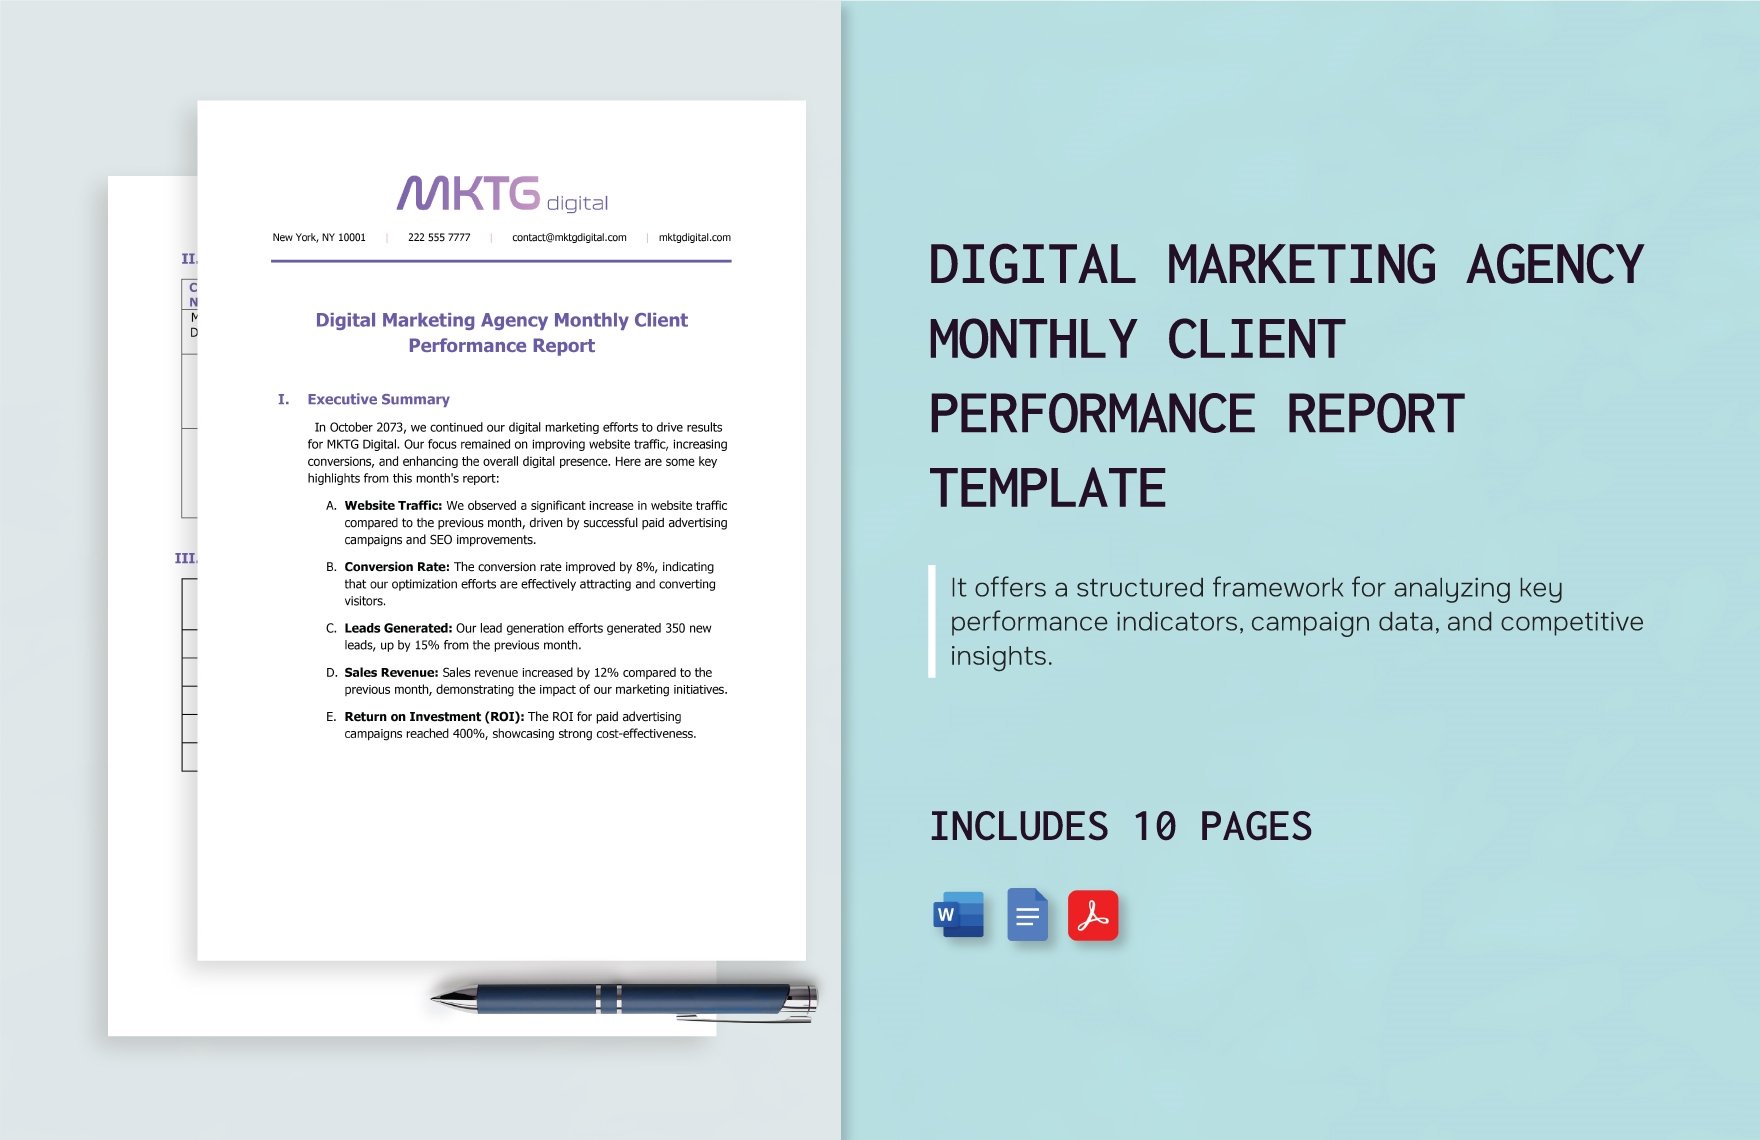 Digital Marketing Agency Monthly Client Performance Report Template in Word, Google Docs, PDF